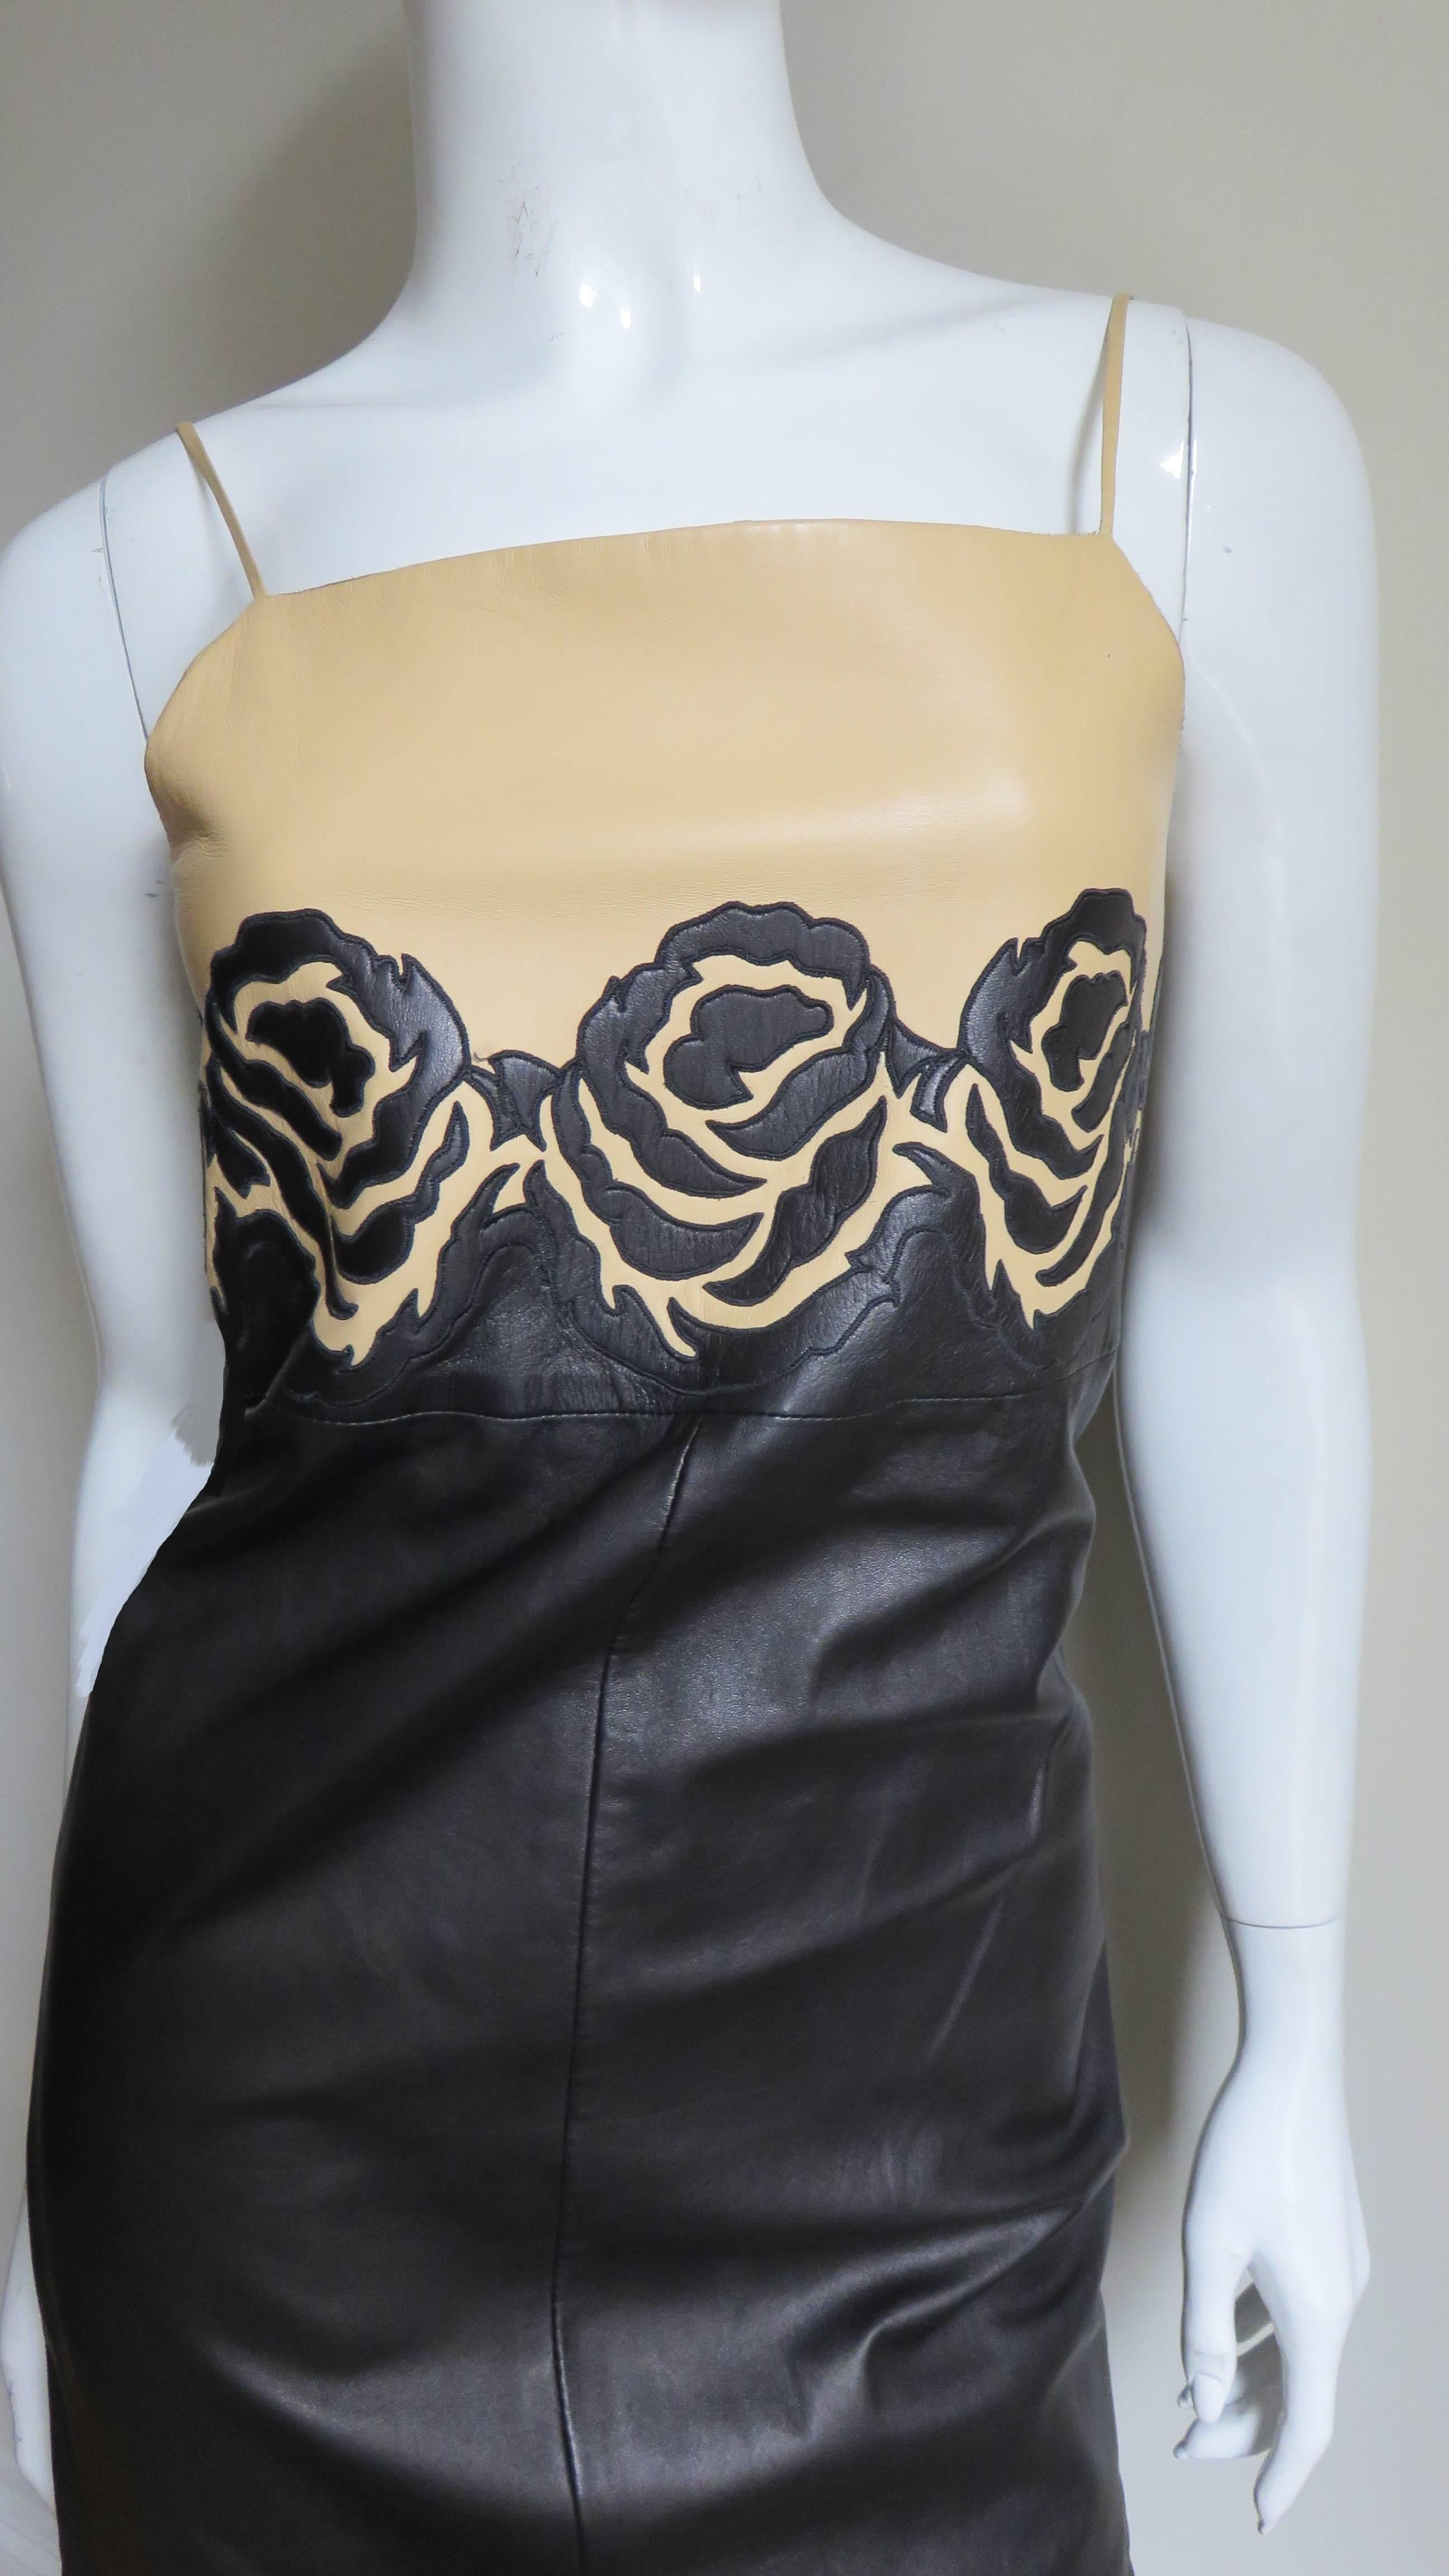  Gianni Versace Leather Color Block Dress with Applique Roses 1990s In Good Condition In Water Mill, NY